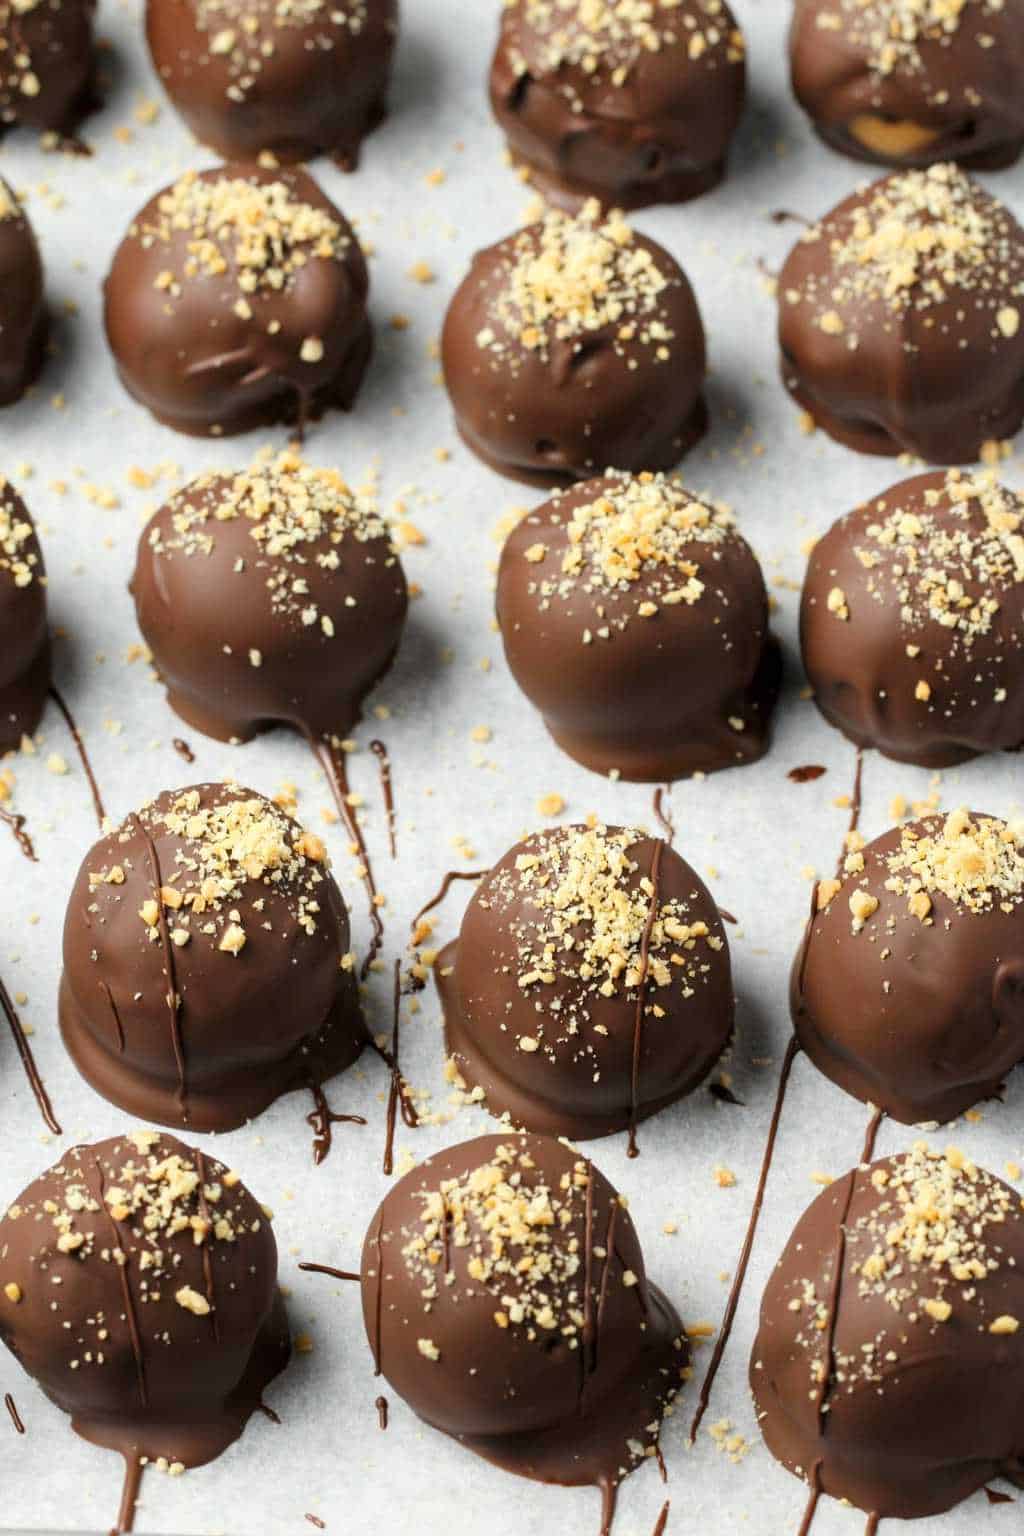 Vegan peanut butter balls smothered in chocolate on a parchment lined baking tray. 